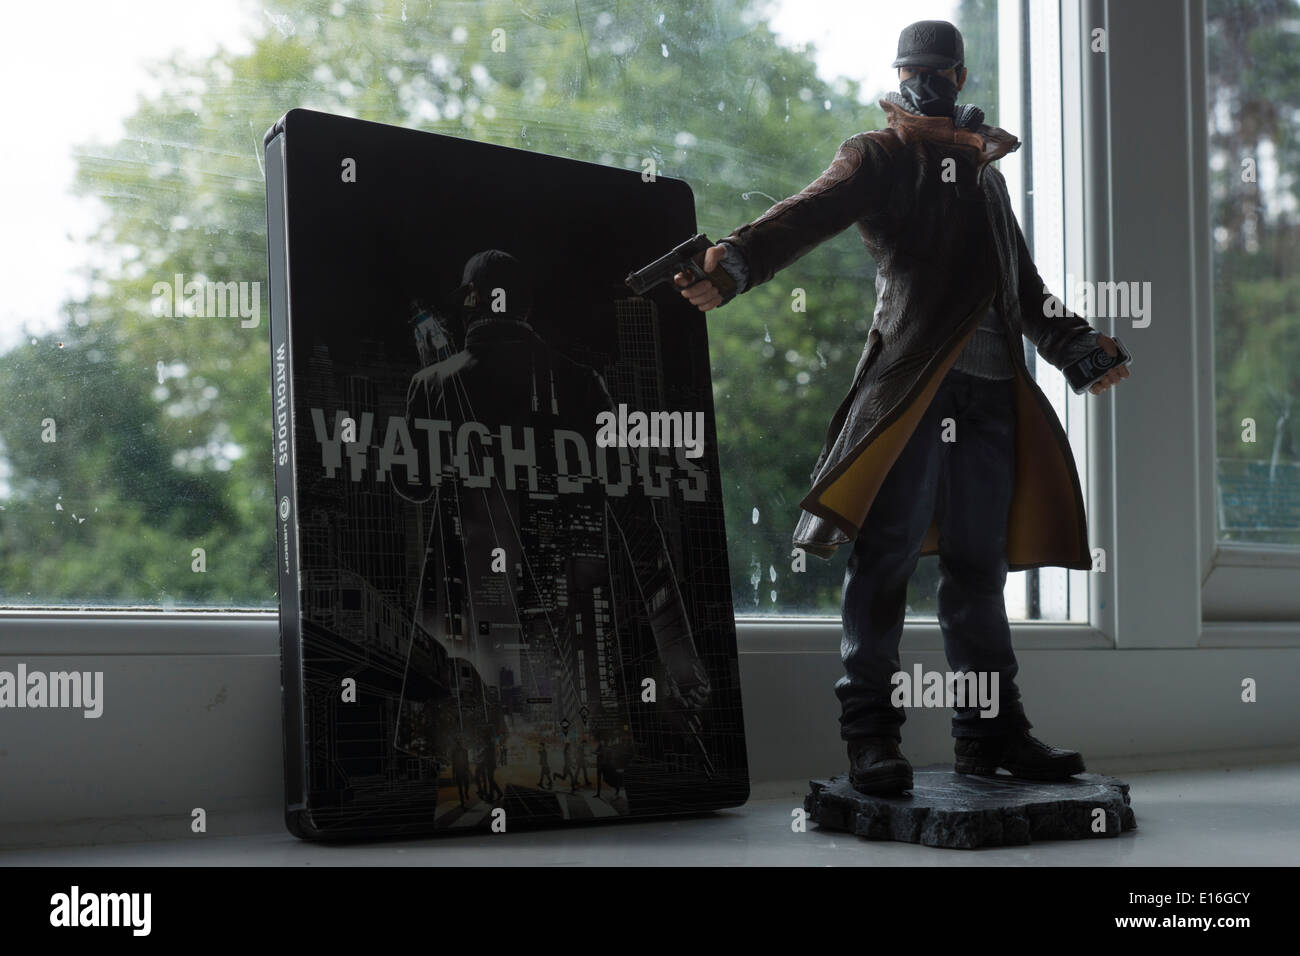 Watch   Dogs video game figurine  boxes cases Stock Photo